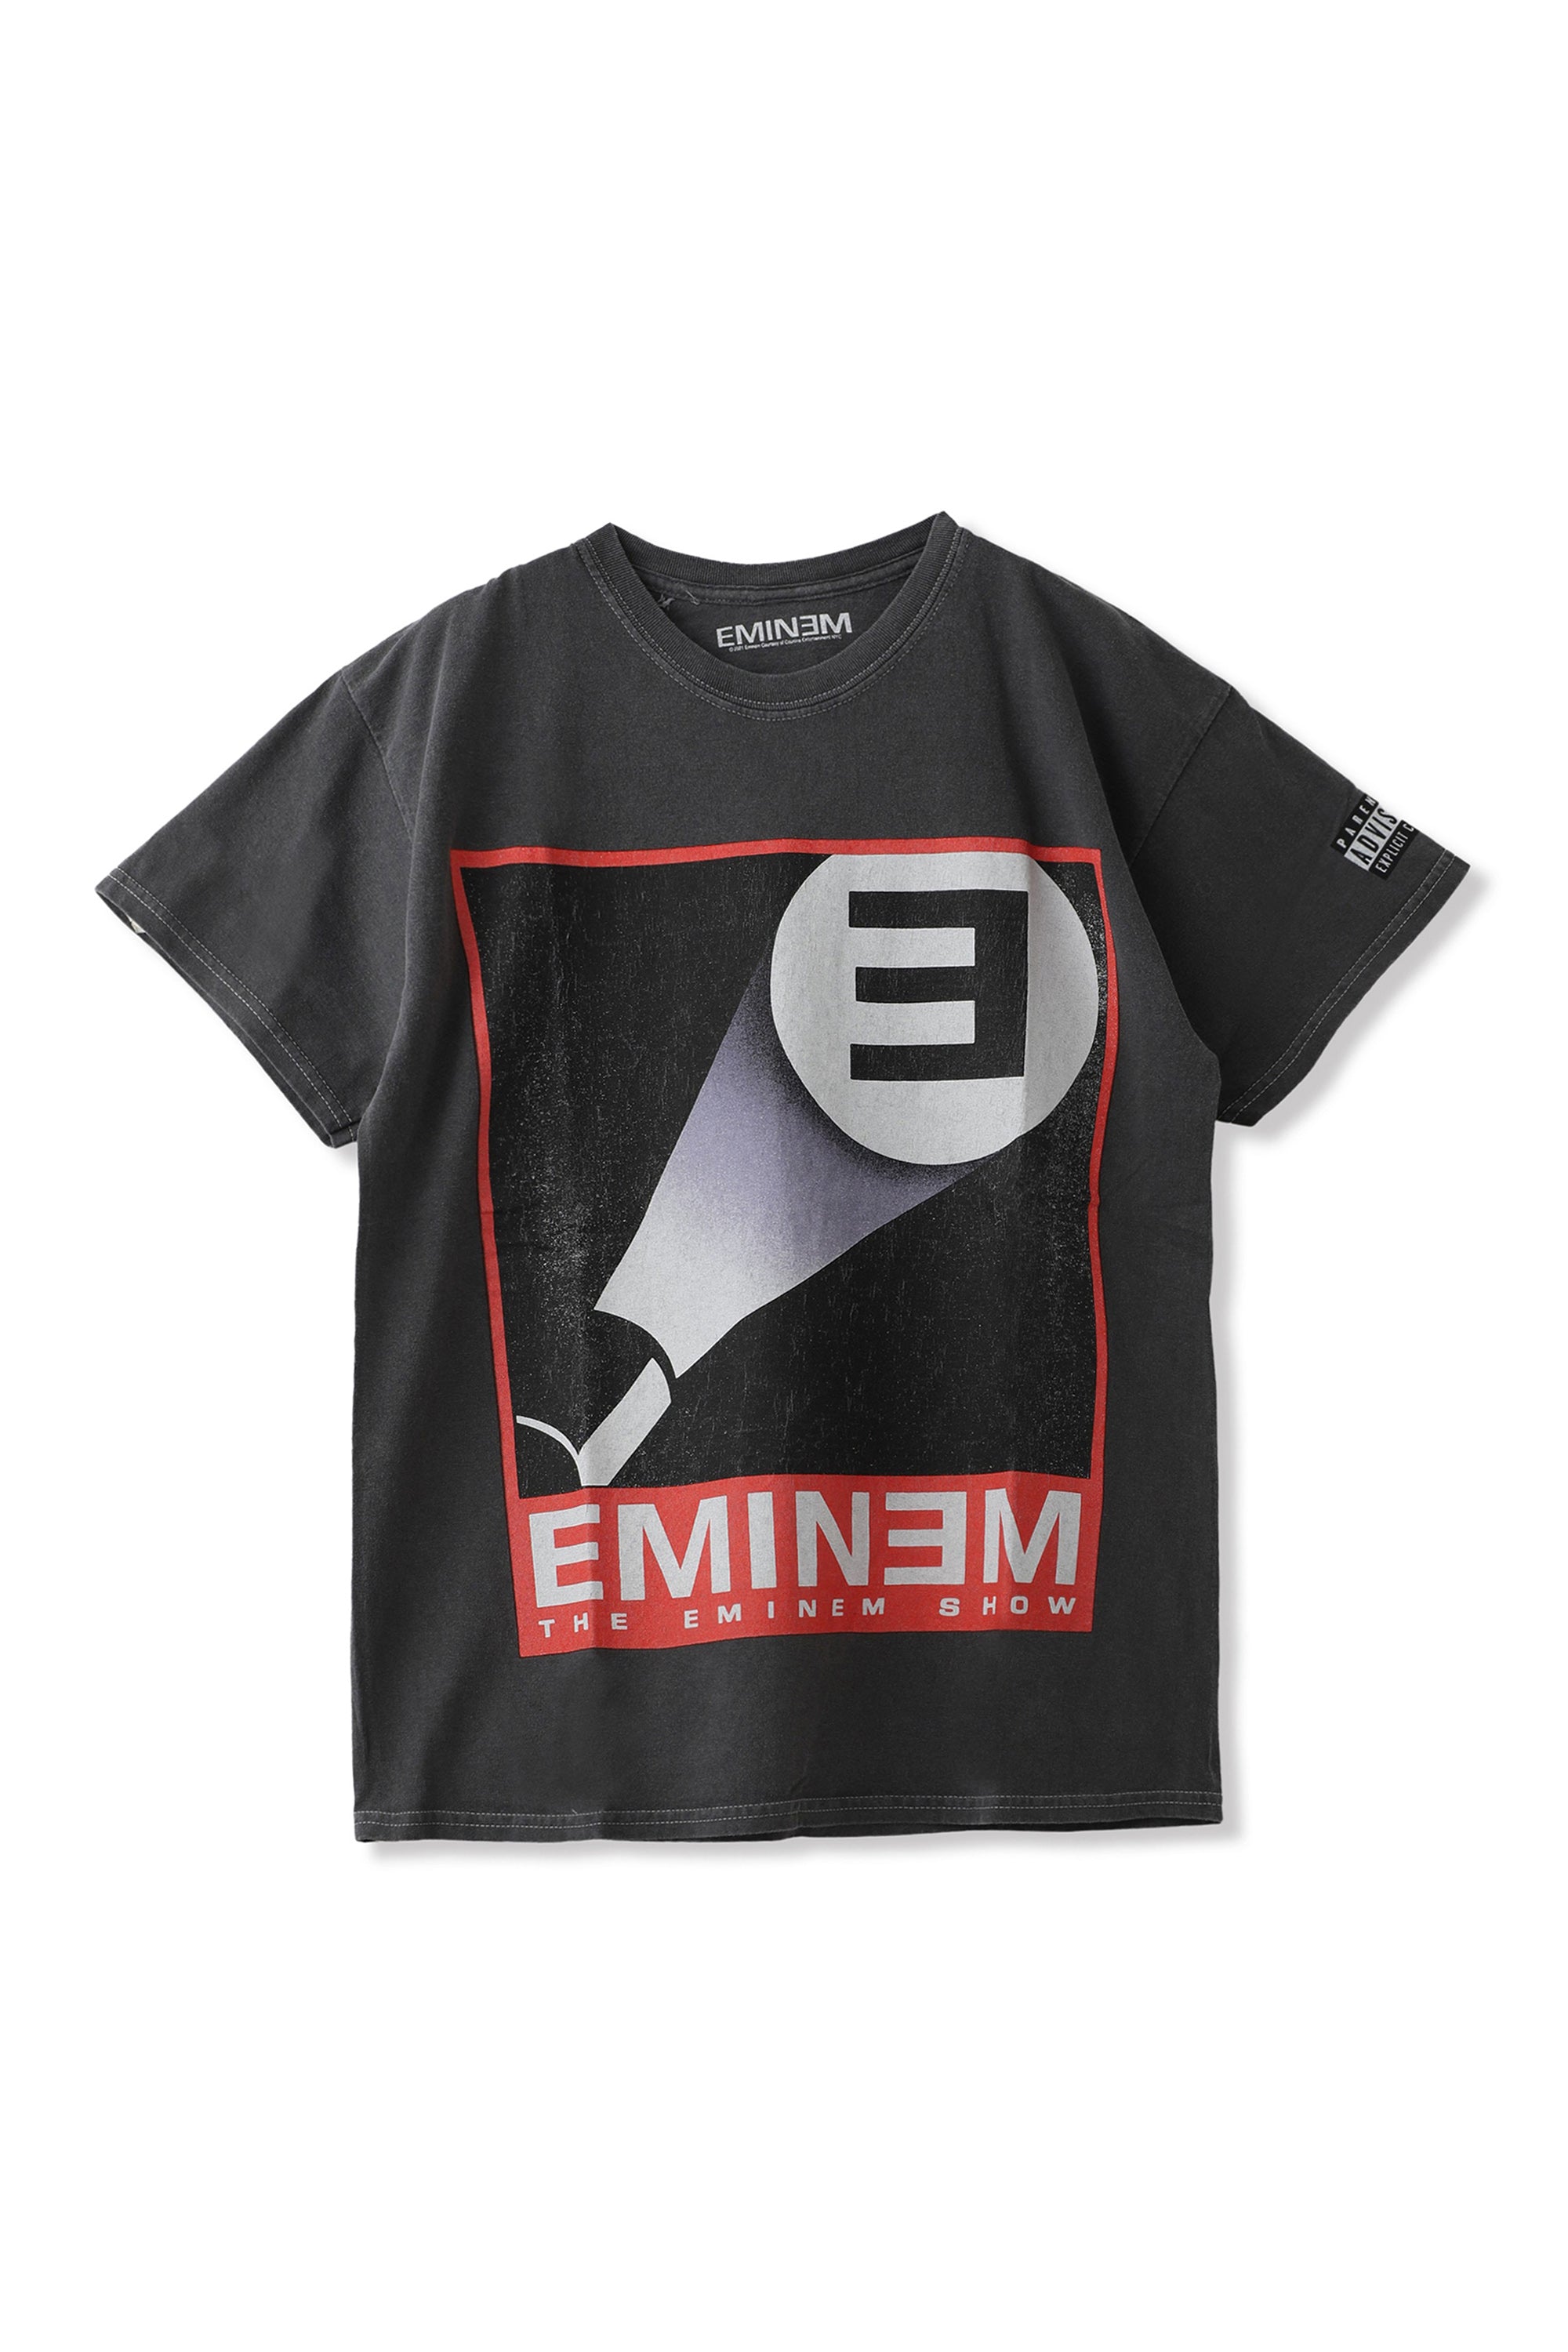 × EMINEM SHOW AFTERMATH RECORDS 2002 TEE